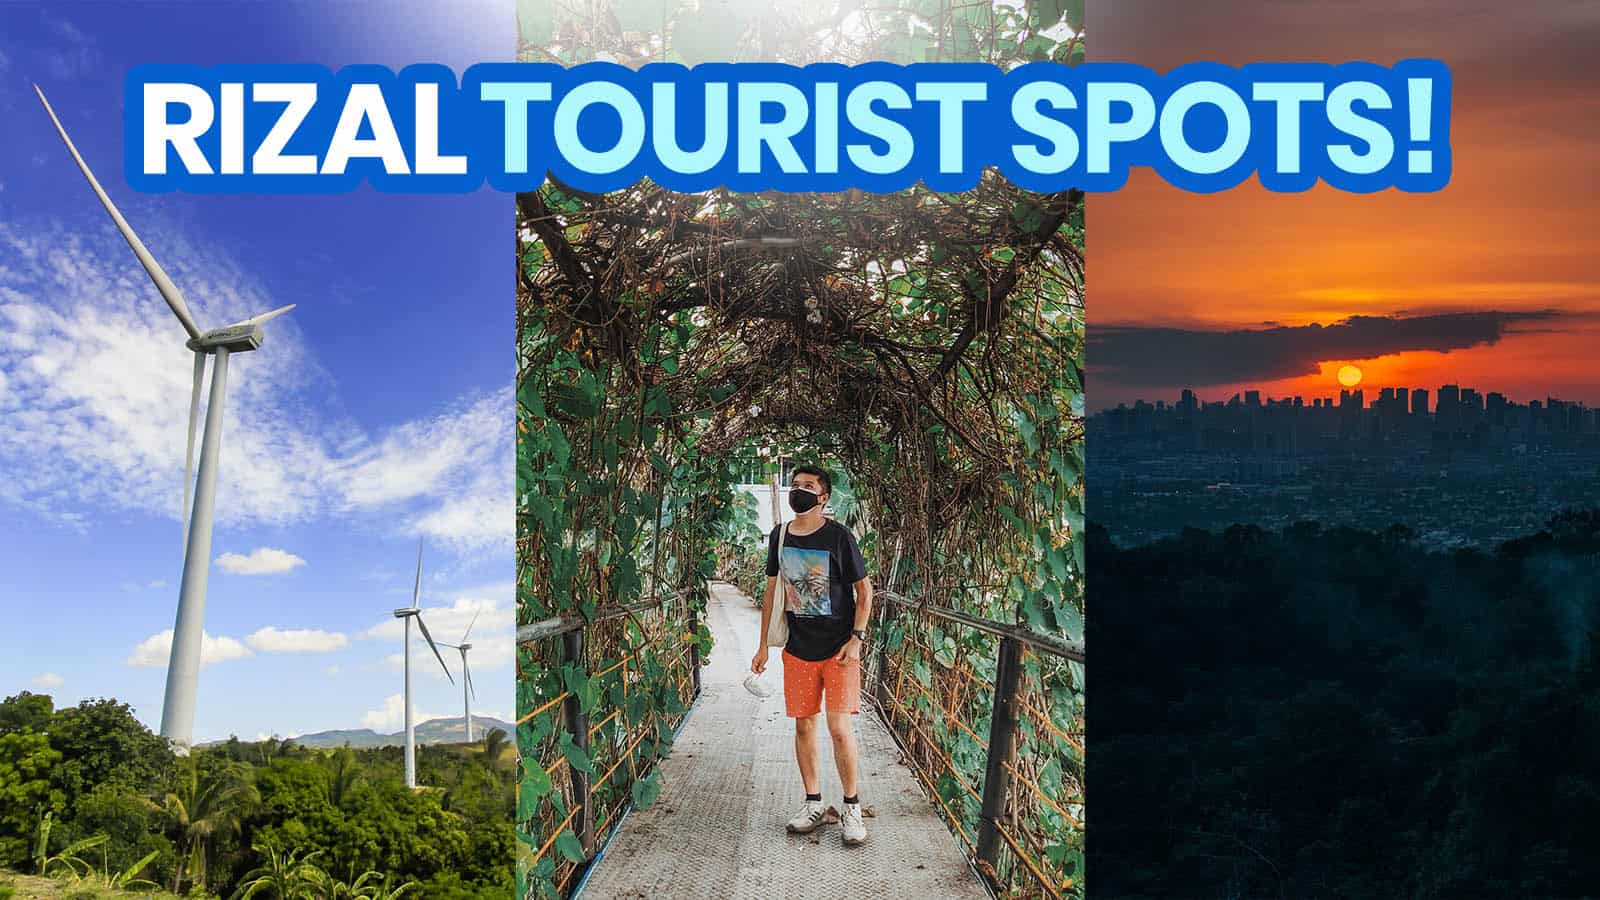 25 Best RIZAL TOURIST SPOTS to Visit & Things to Do